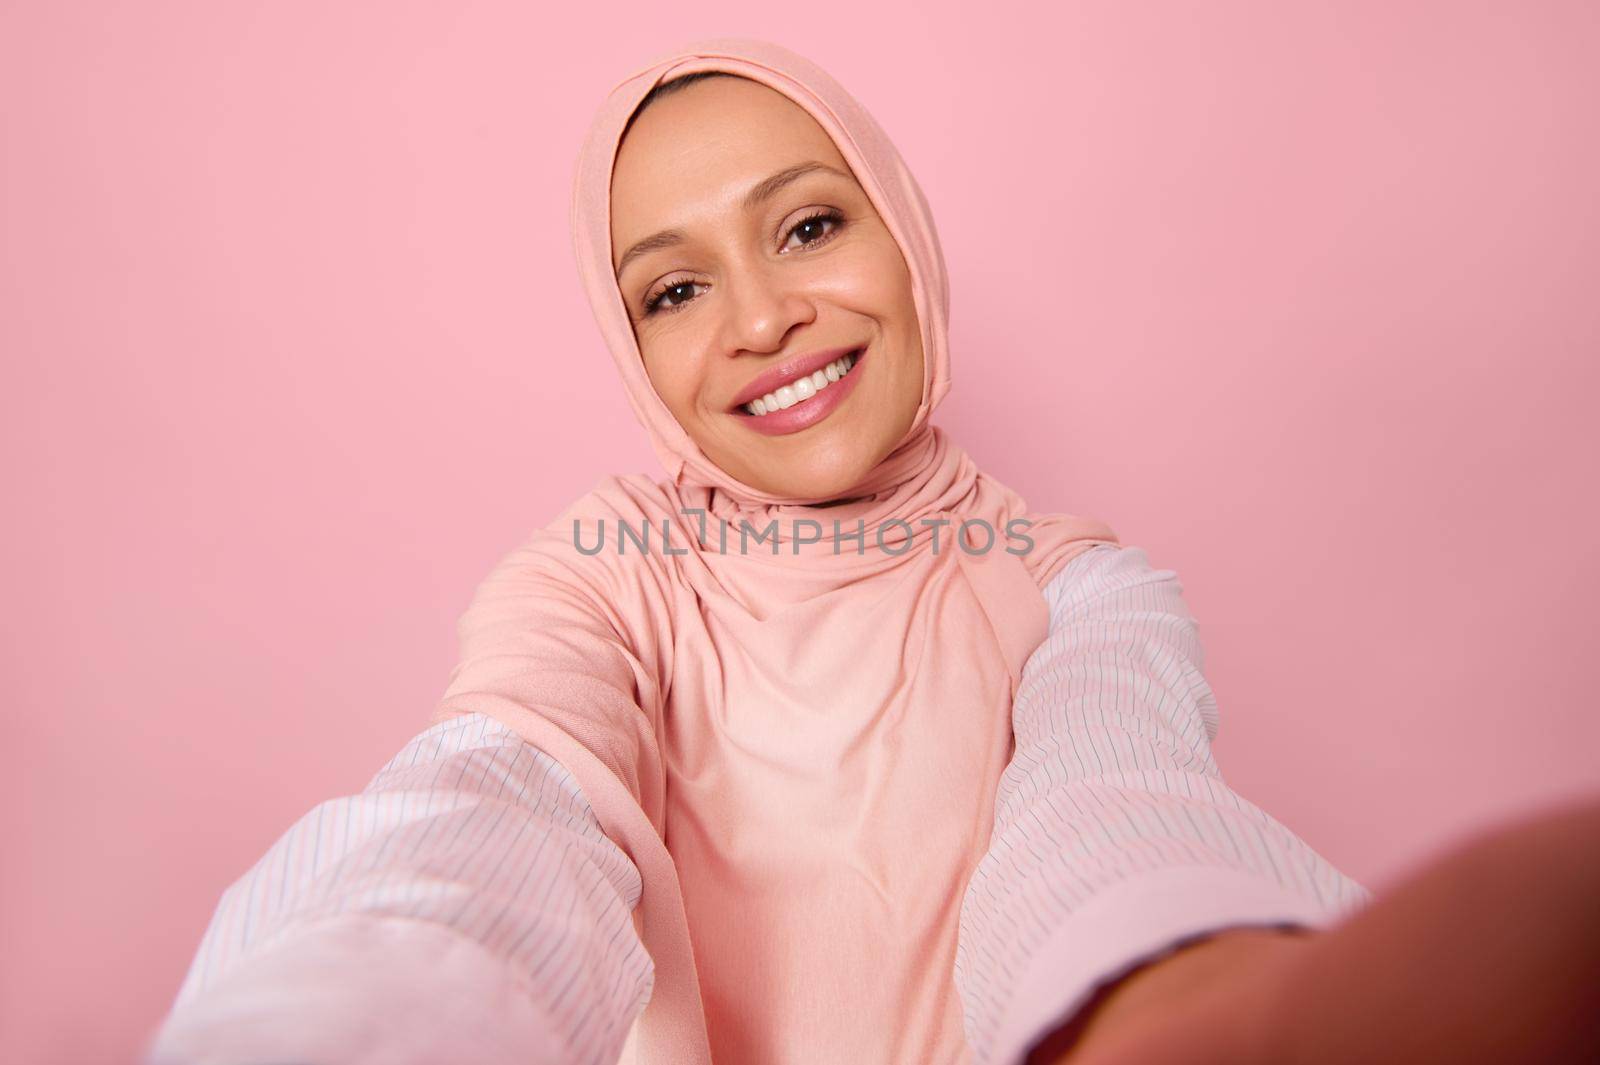 Close-up portrait of an attractive woman wearing traditional religious islamic outfit, pink hijab, holding smartphone in outstretched arms and smiles with toothy smile making a selfie, self-portrait by artgf